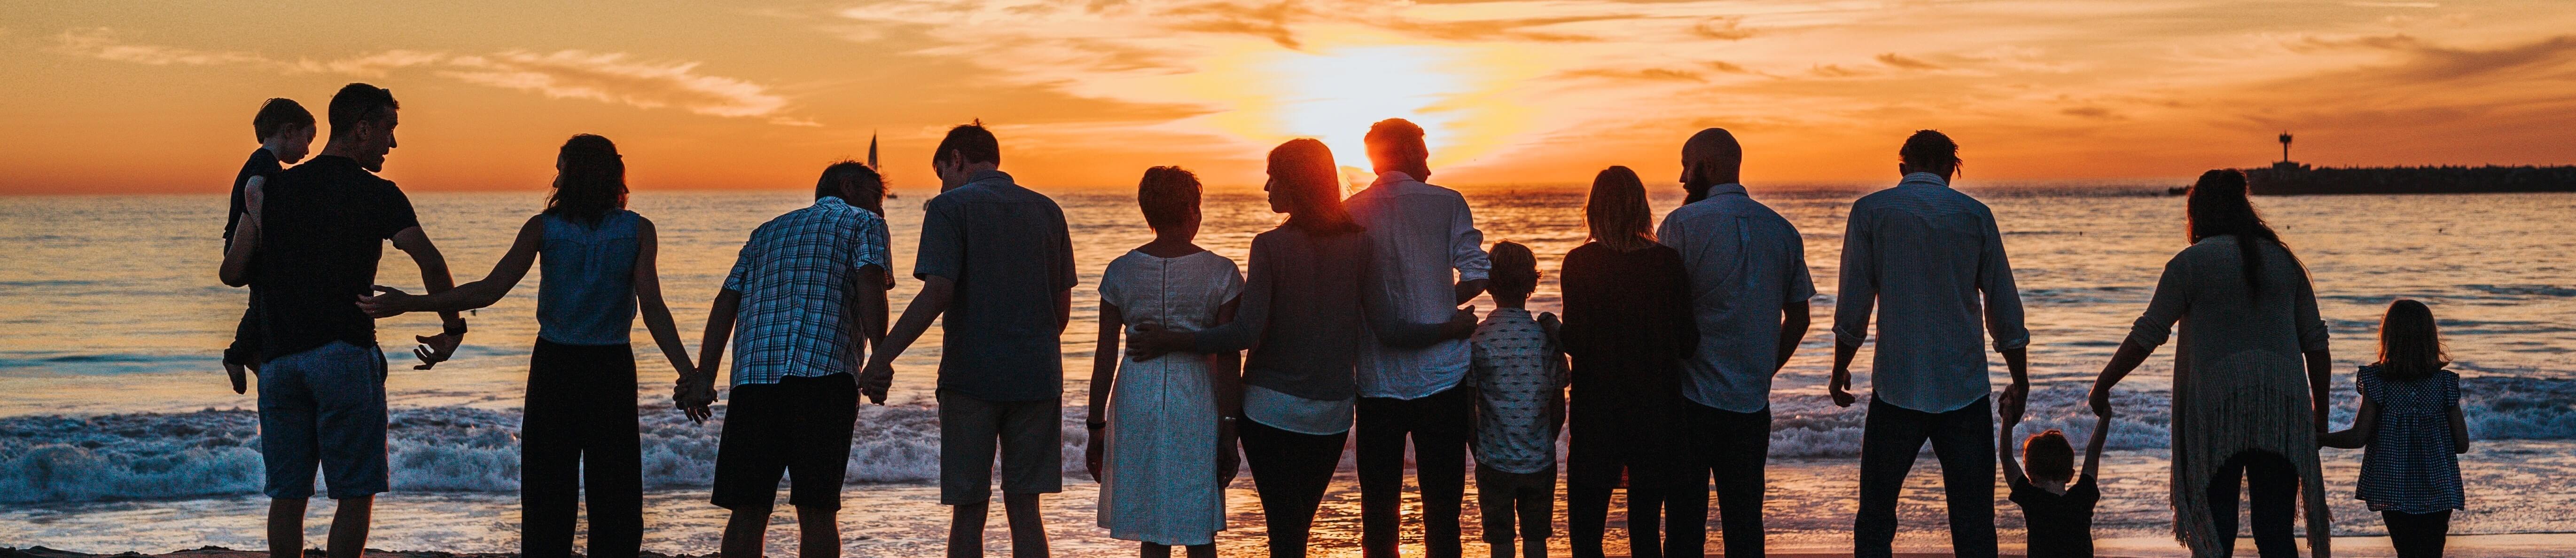 Family sunset cropped